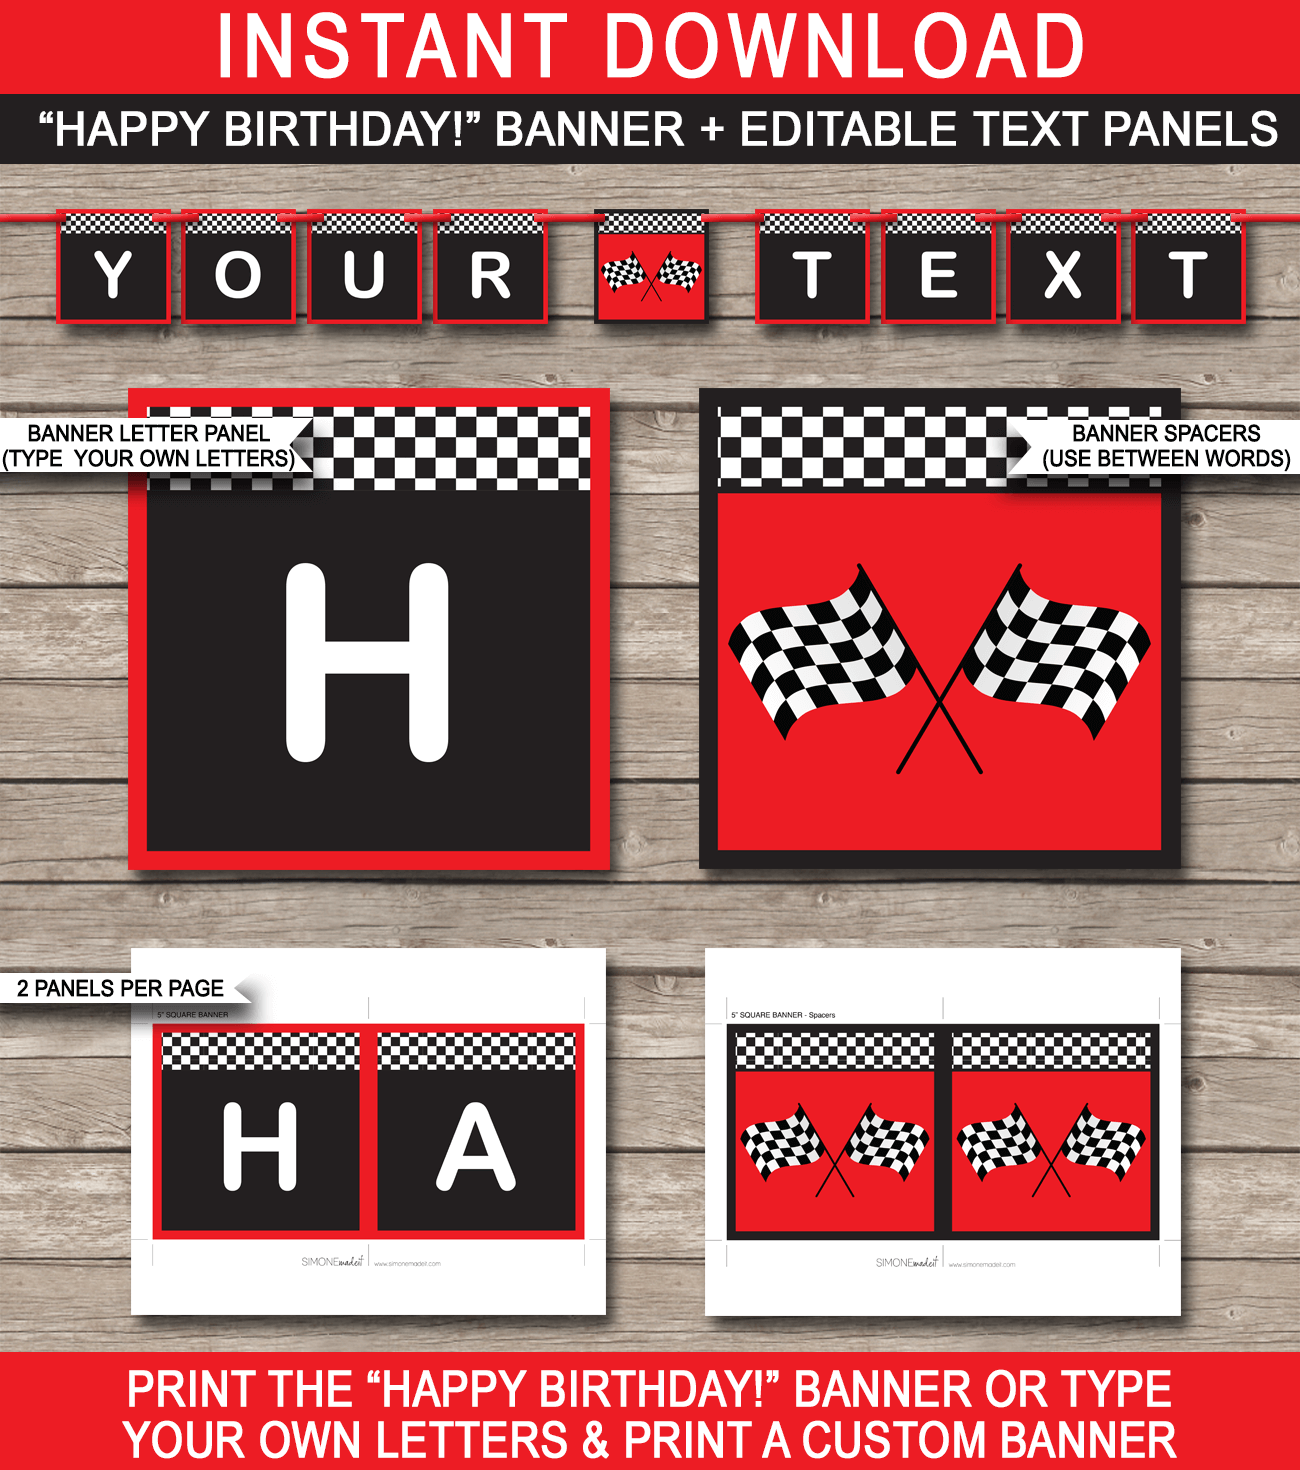 Race Car Party Banner Template - Race Car Bunting - Happy Birthday Banner - Birthday Party - Editable and Printable DIY Template - INSTANT DOWNLOAD $4.50 via simonemadeit.com